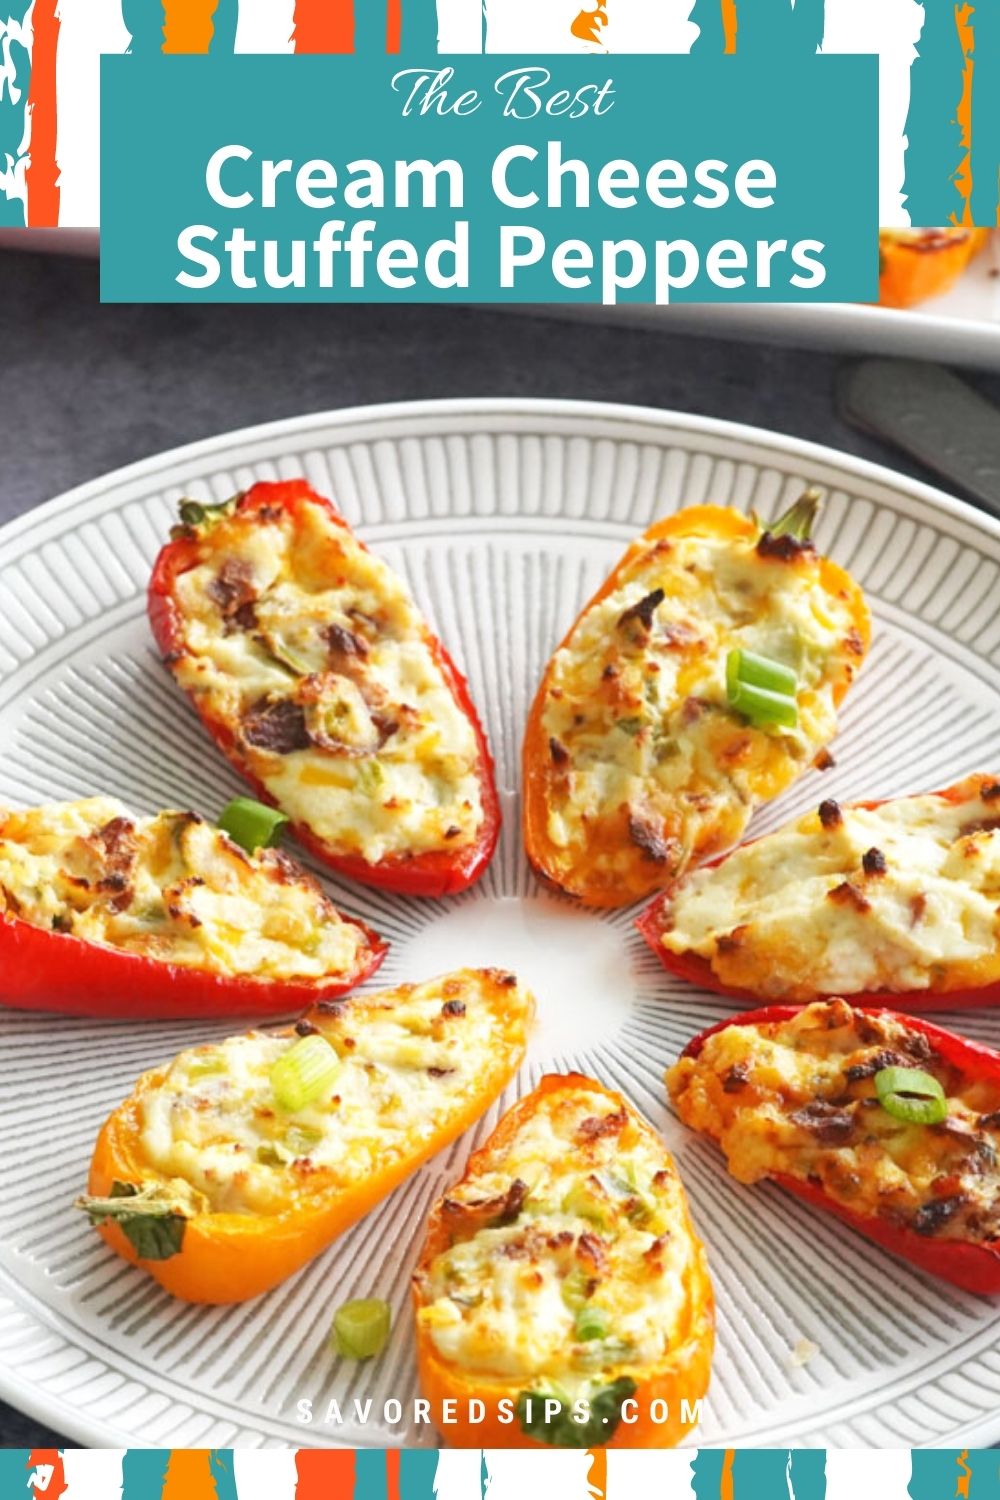 Cream cheese stuffed peppers on a platter